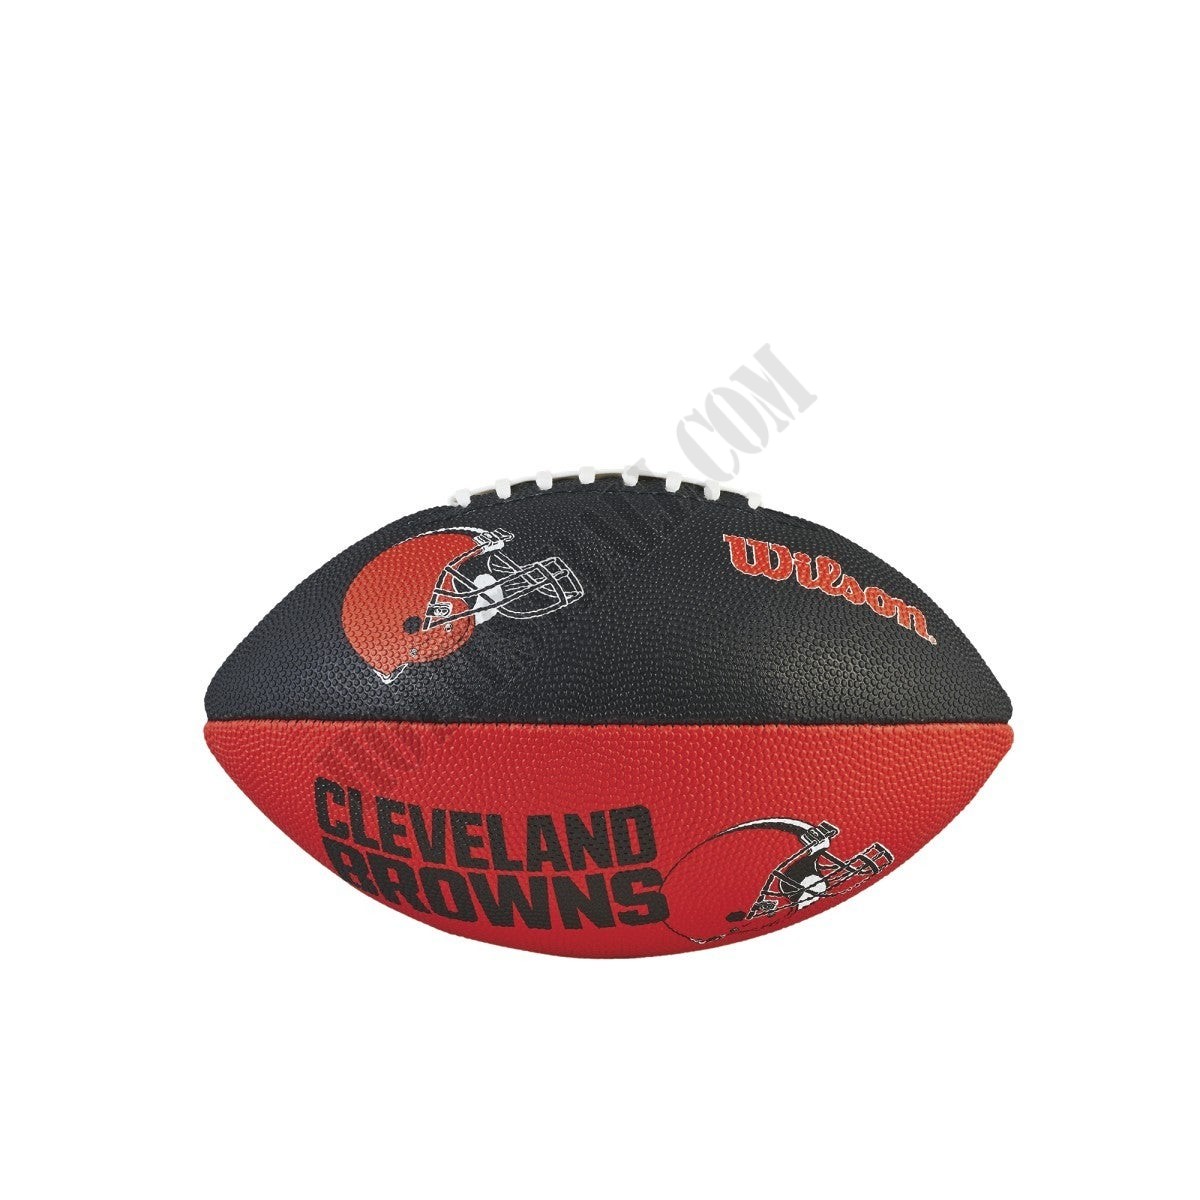 NFL Team Tailgate Football - Cleveland Browns ● Wilson Promotions - -0